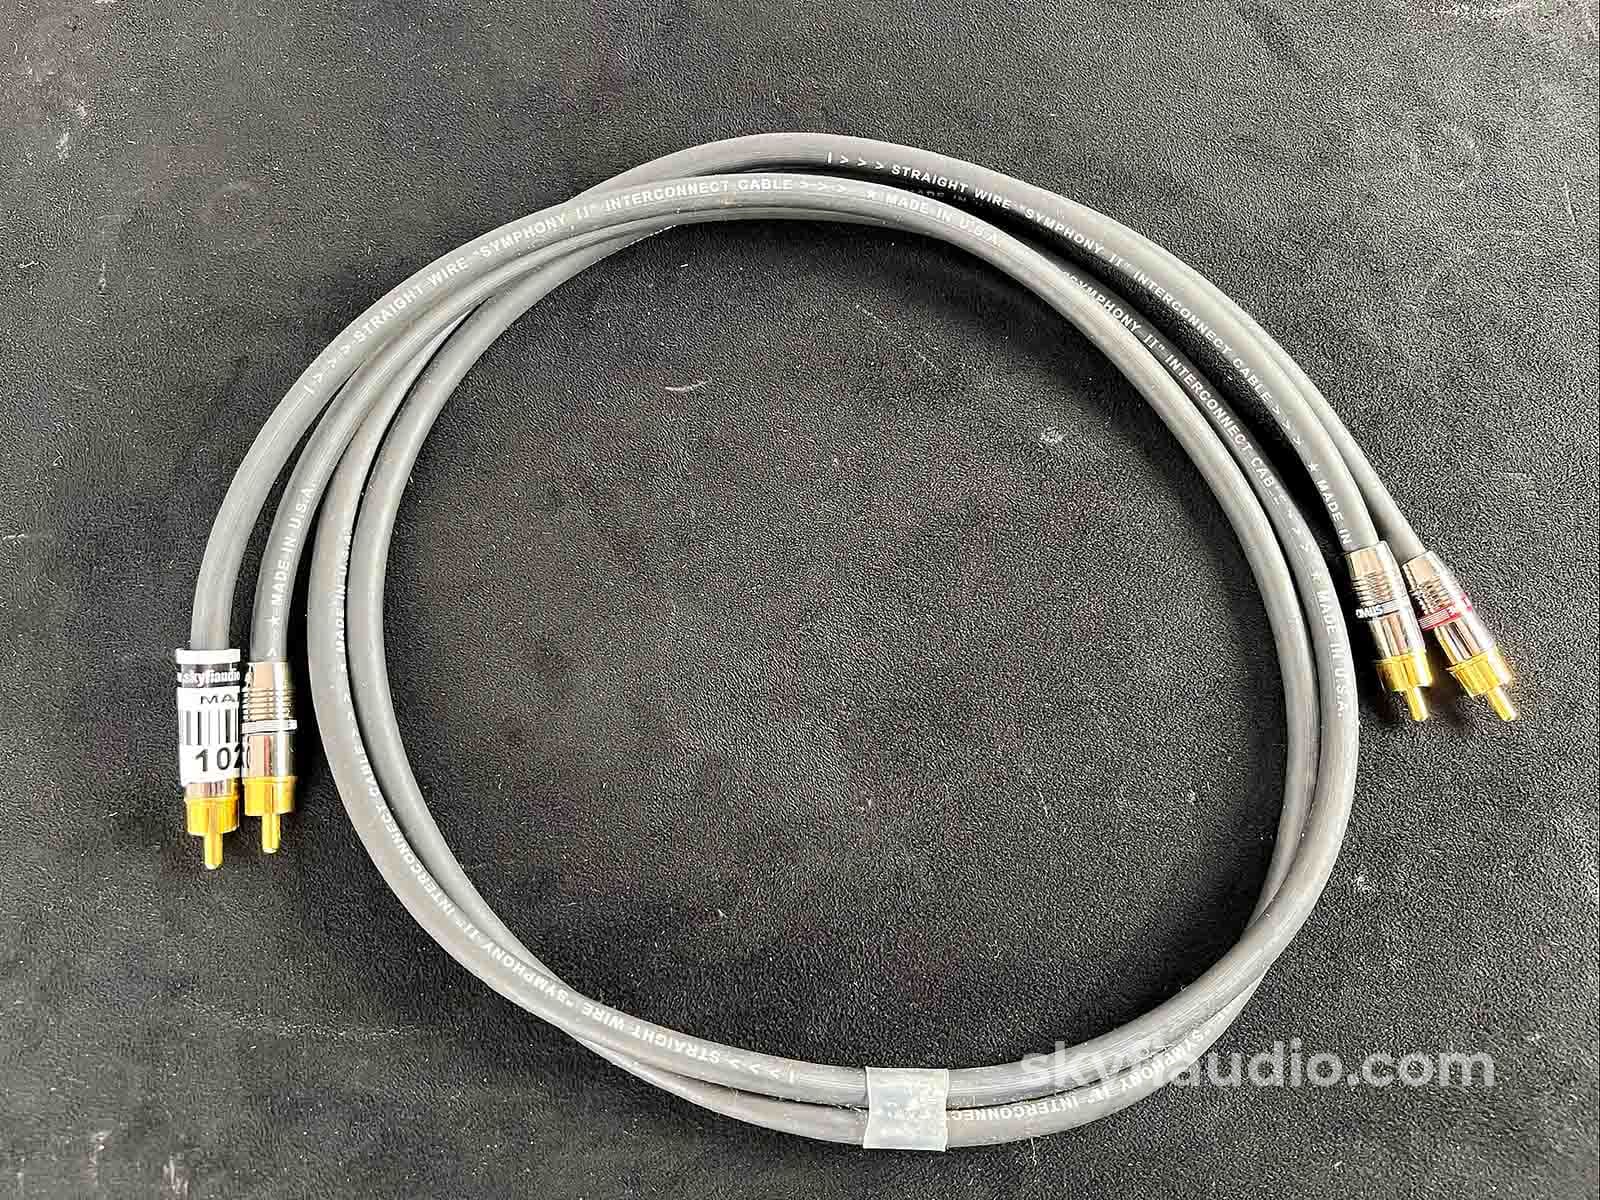 Straight Wire Symphony Rca Interconnects (Pair) - 1M Cables